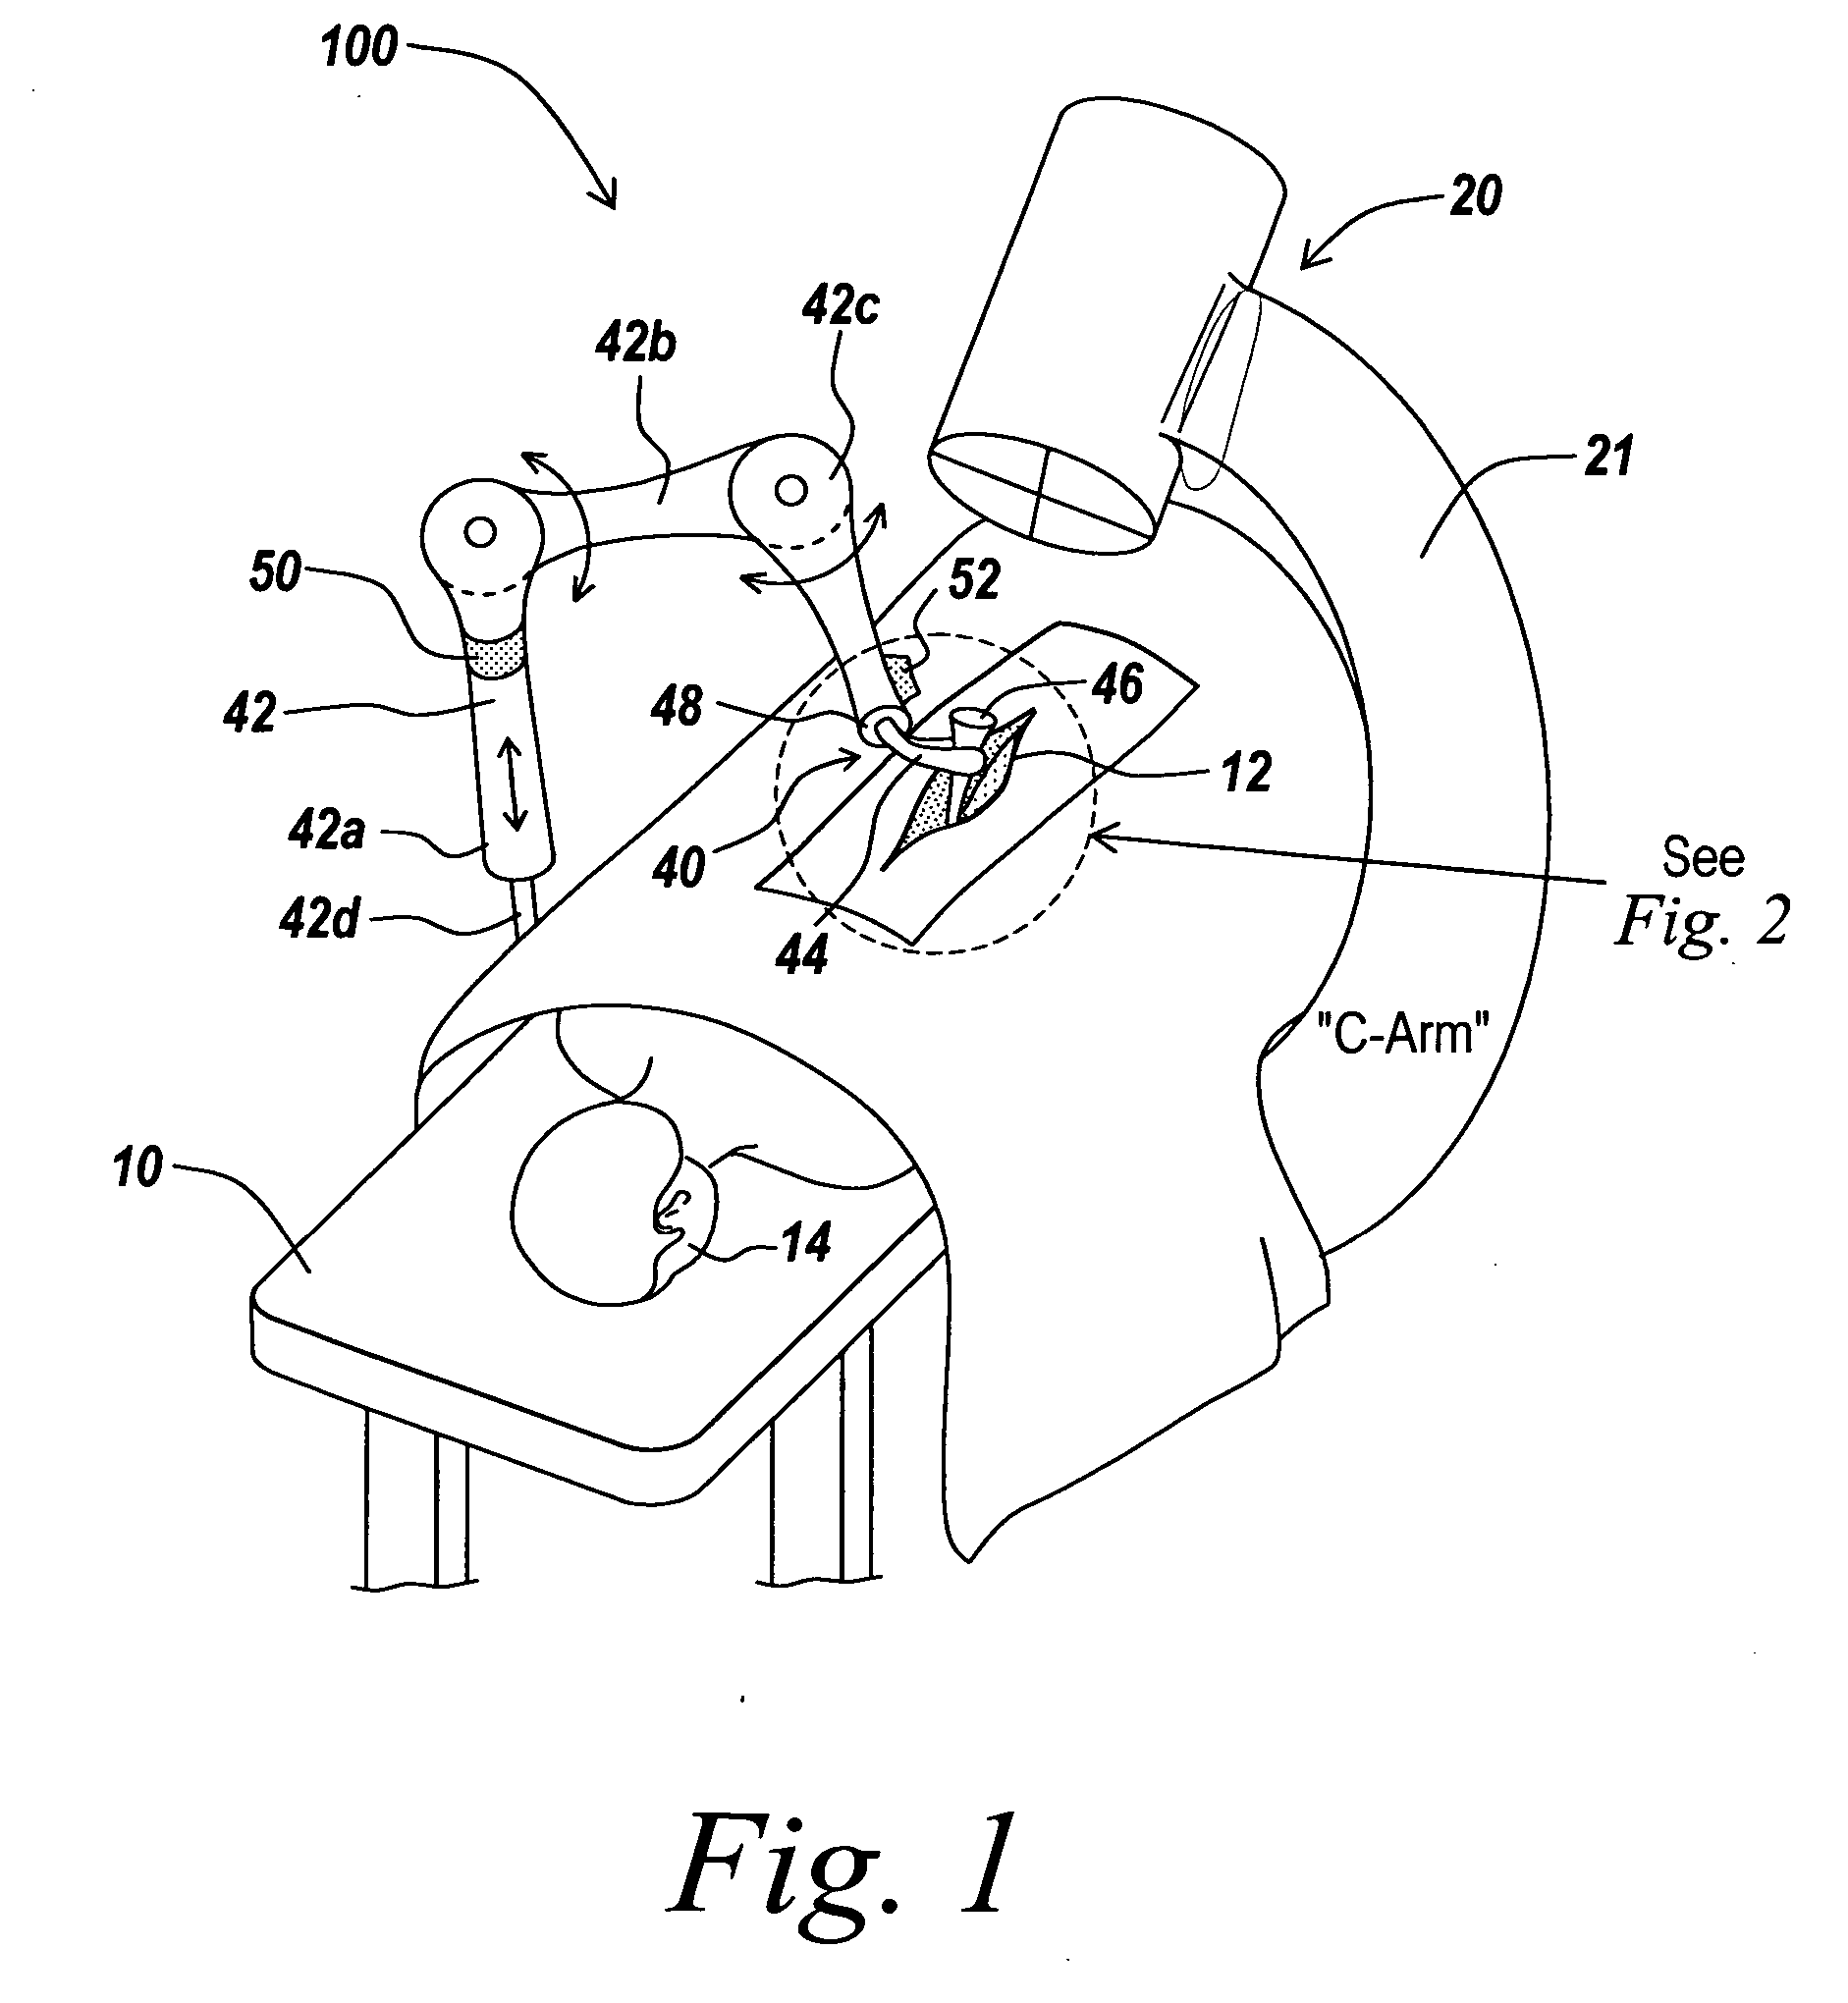 Rigidly guided implant placement with control assist